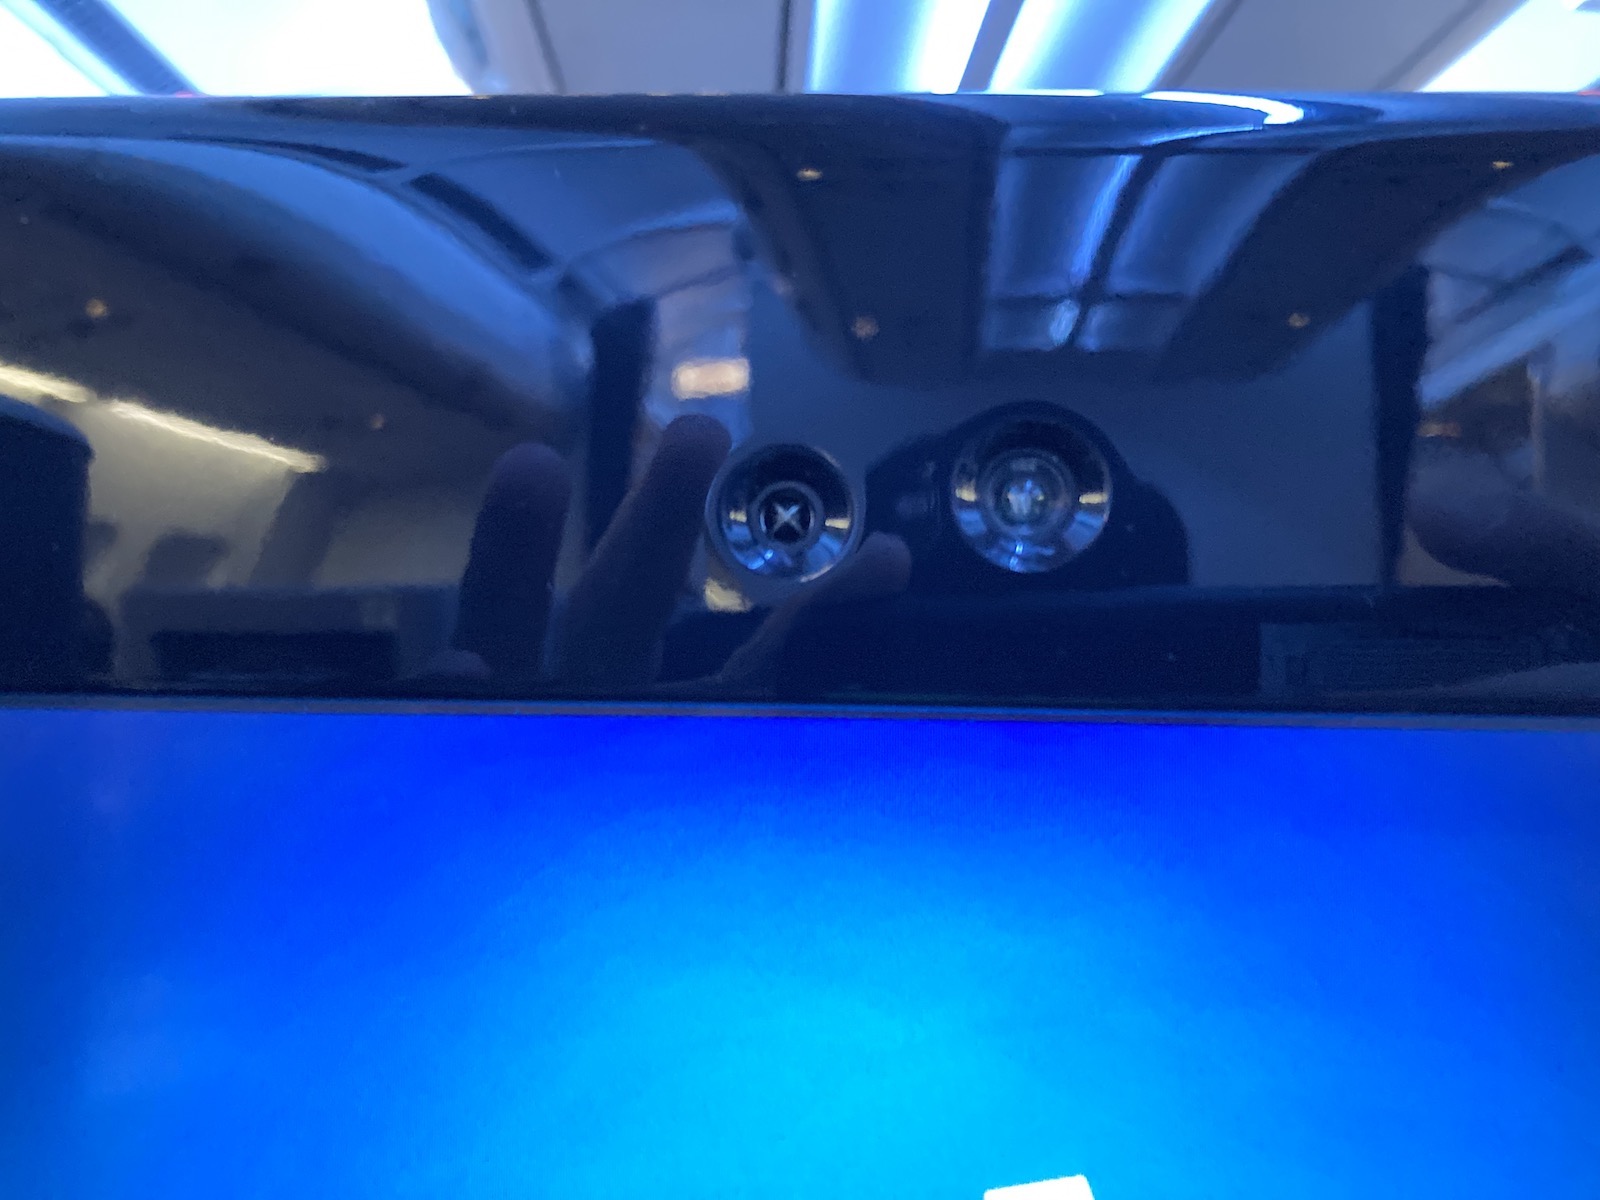 Review Azul A330neo Business Class From FLL to VCP - It Has Potential